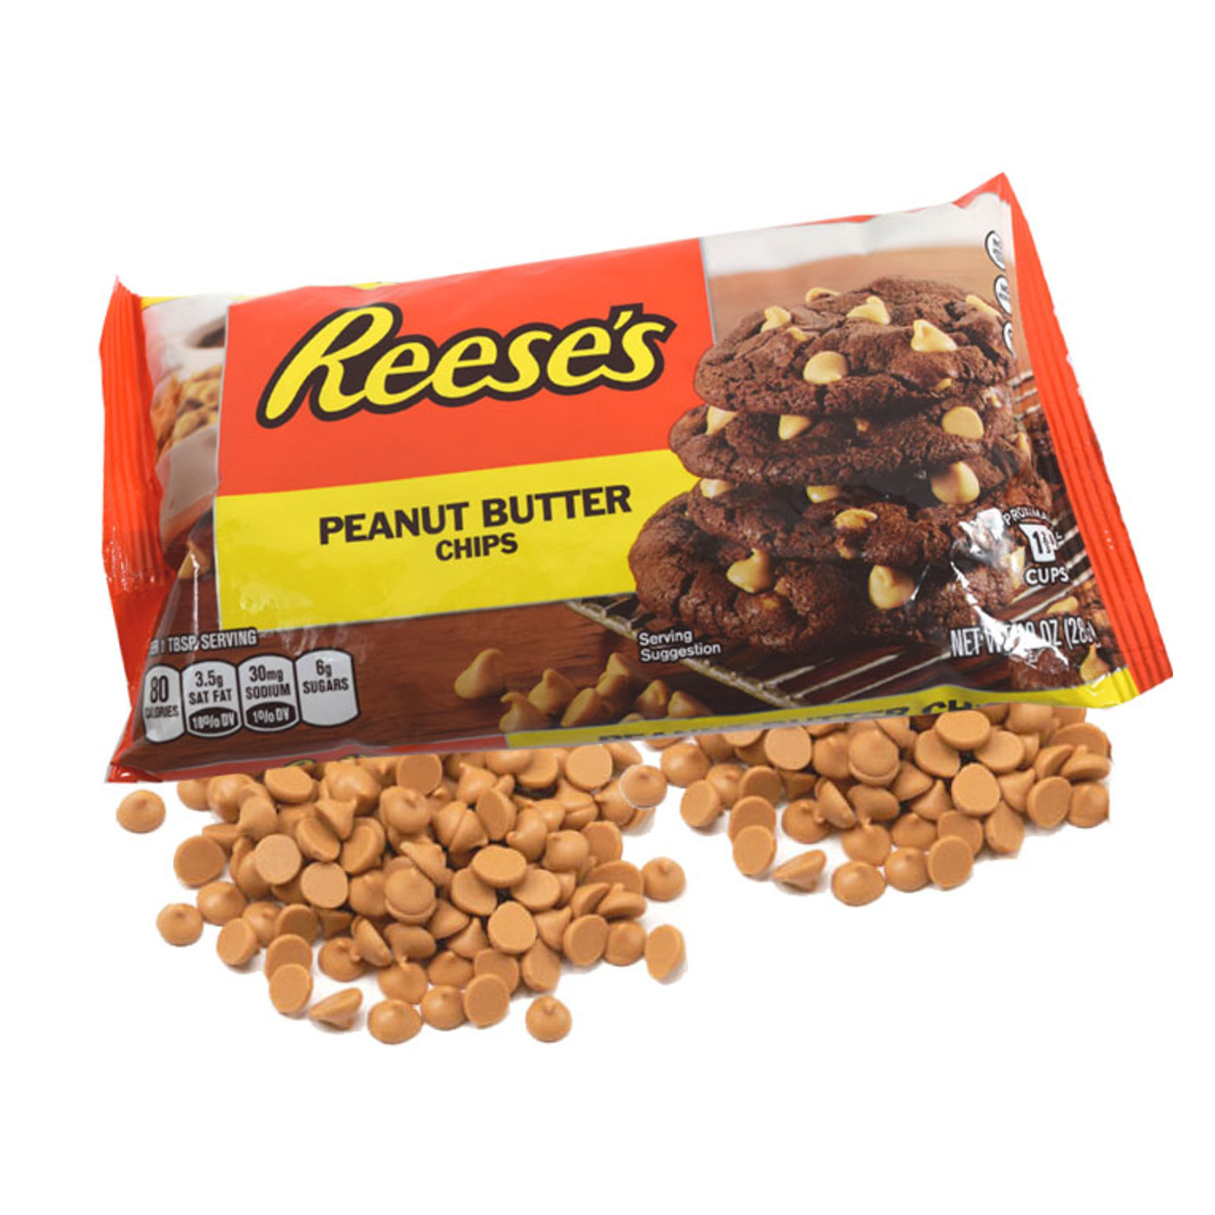 Reese's Peanut Butter Chips Bag 10oz - 12ct